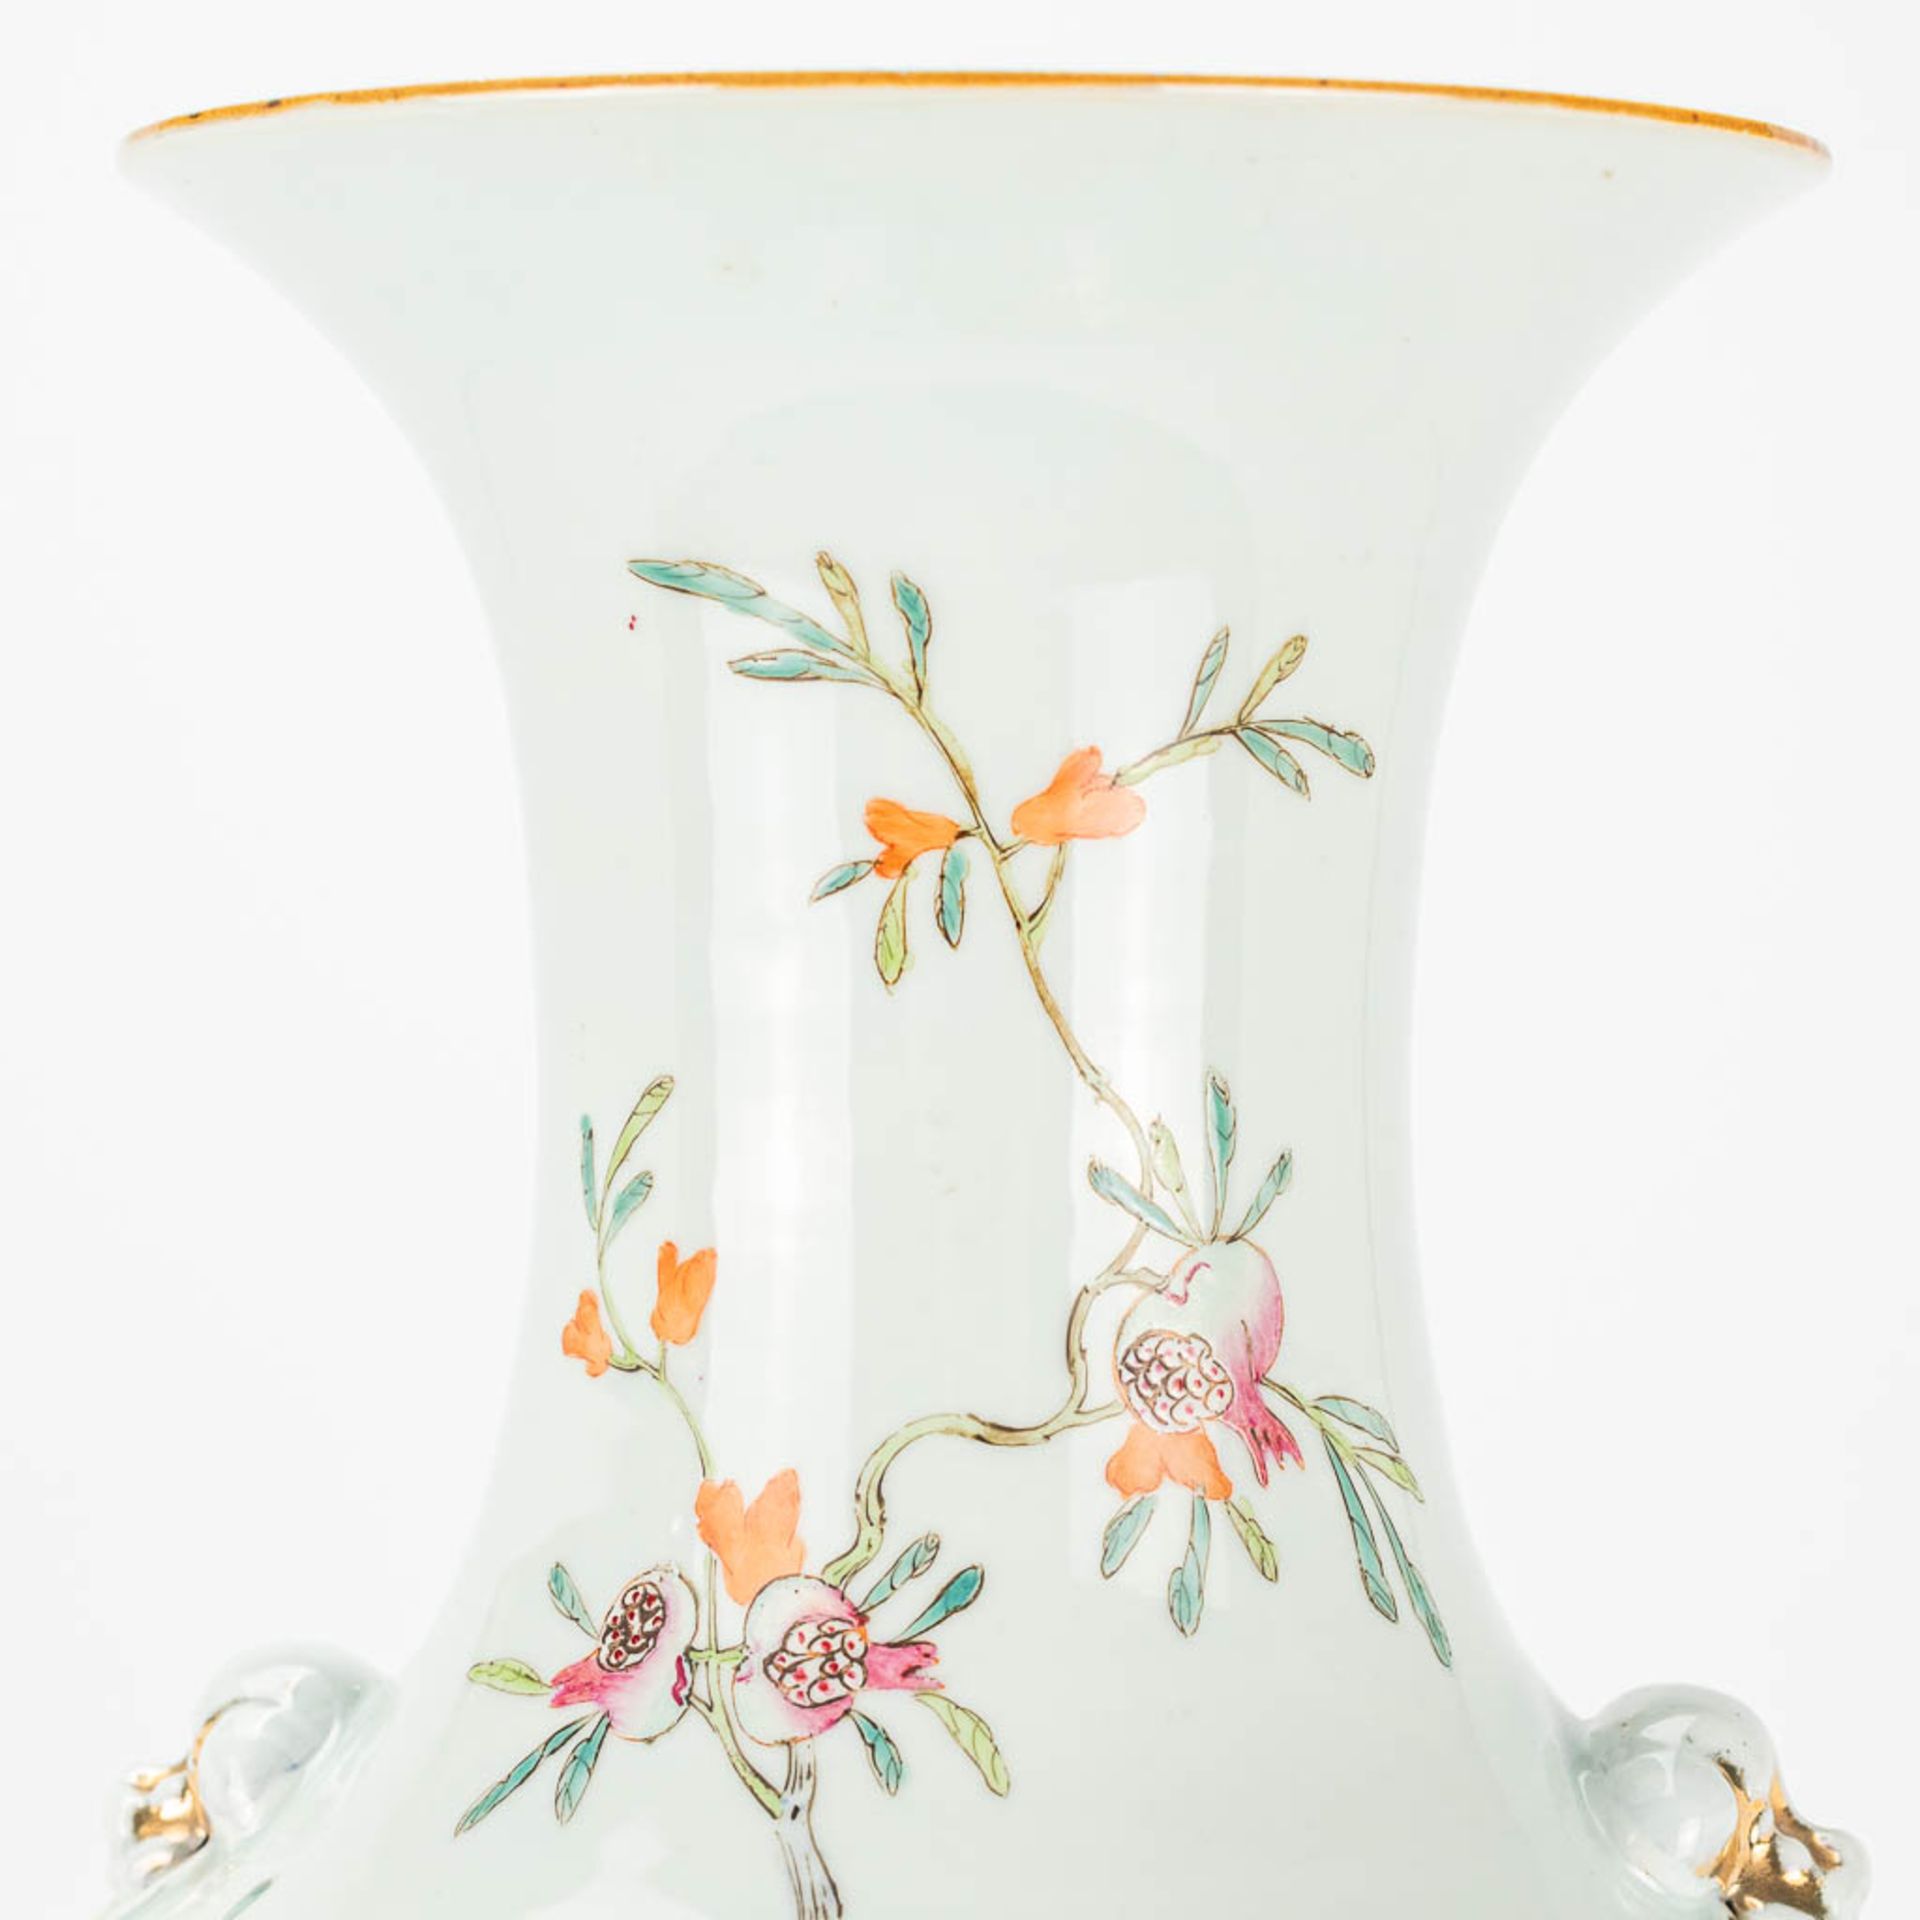 A vase made of Chinese porcelain and decorated with roses and bats. 19th century. - Image 8 of 13